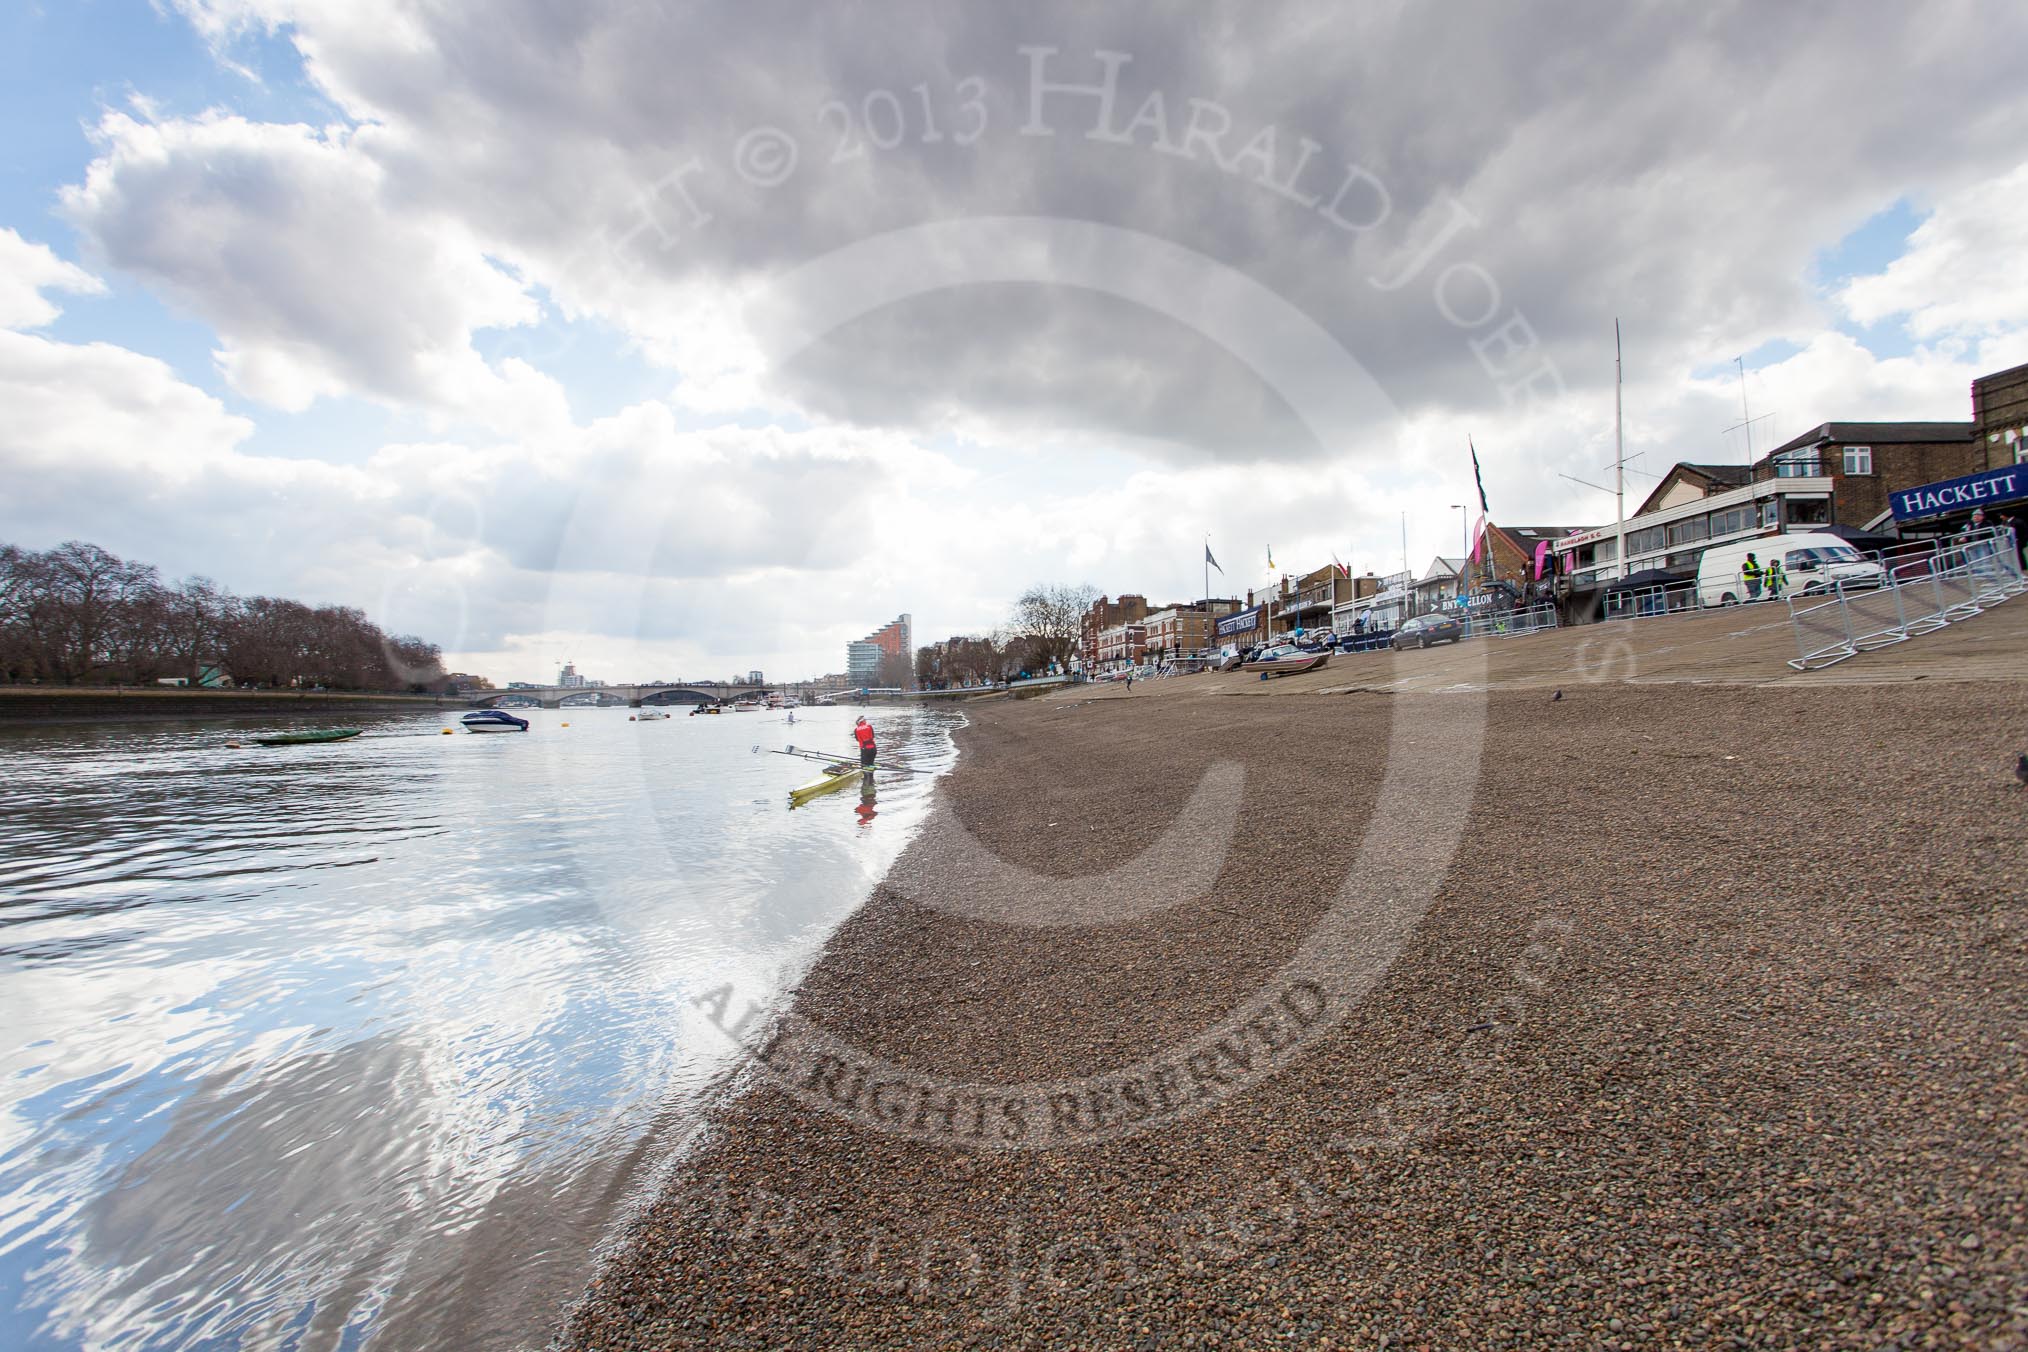 The Boat Race 2013: View along the River Thames, from Putney Embankment, towards Putney Bridge, from where the Boat Race will start..
Putney,
London SW15,

United Kingdom,
on 31 March 2013 at 11:04, image #3